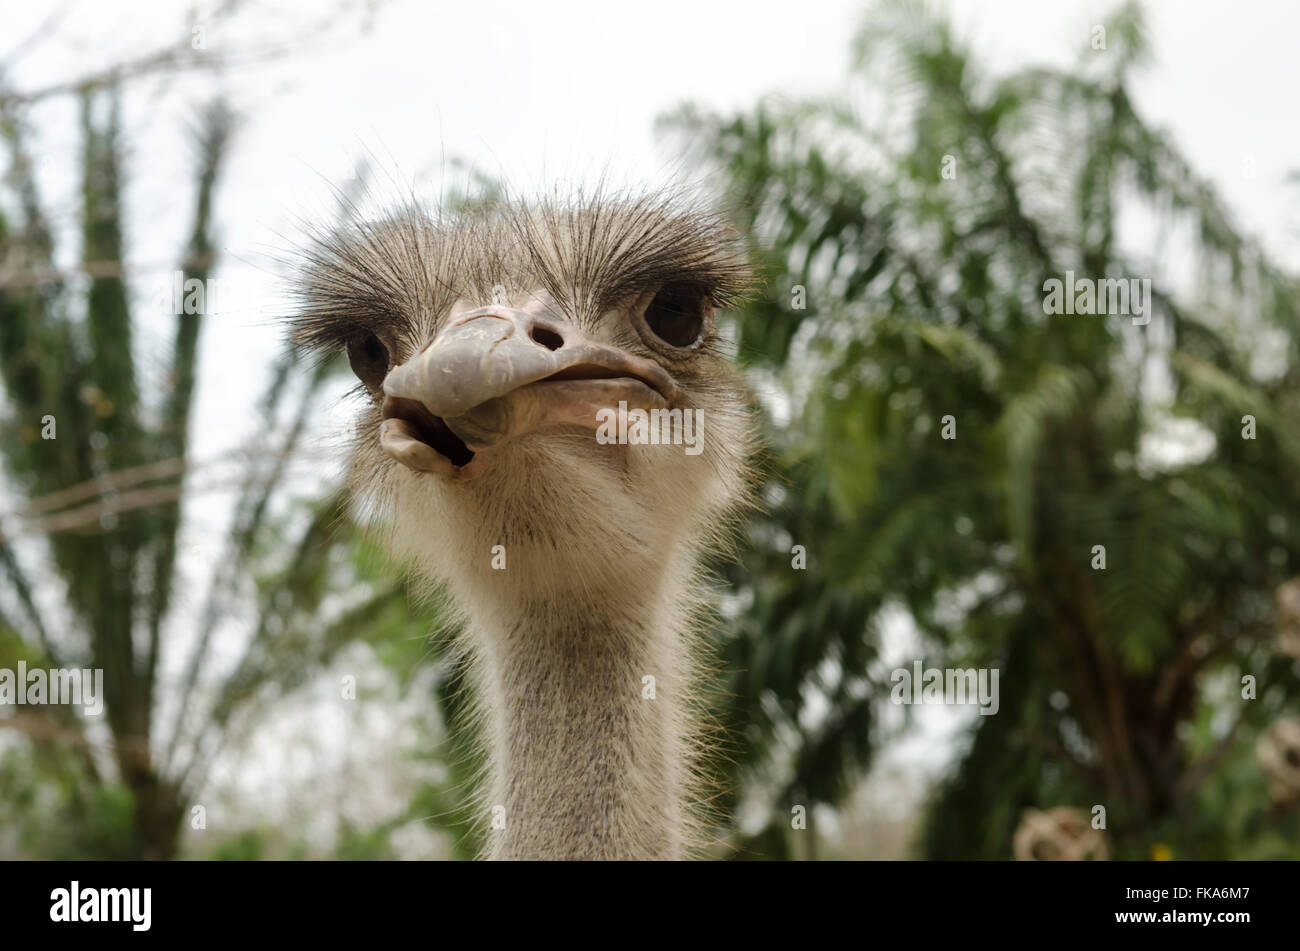 close-up of head of ostrich. Stock Photo